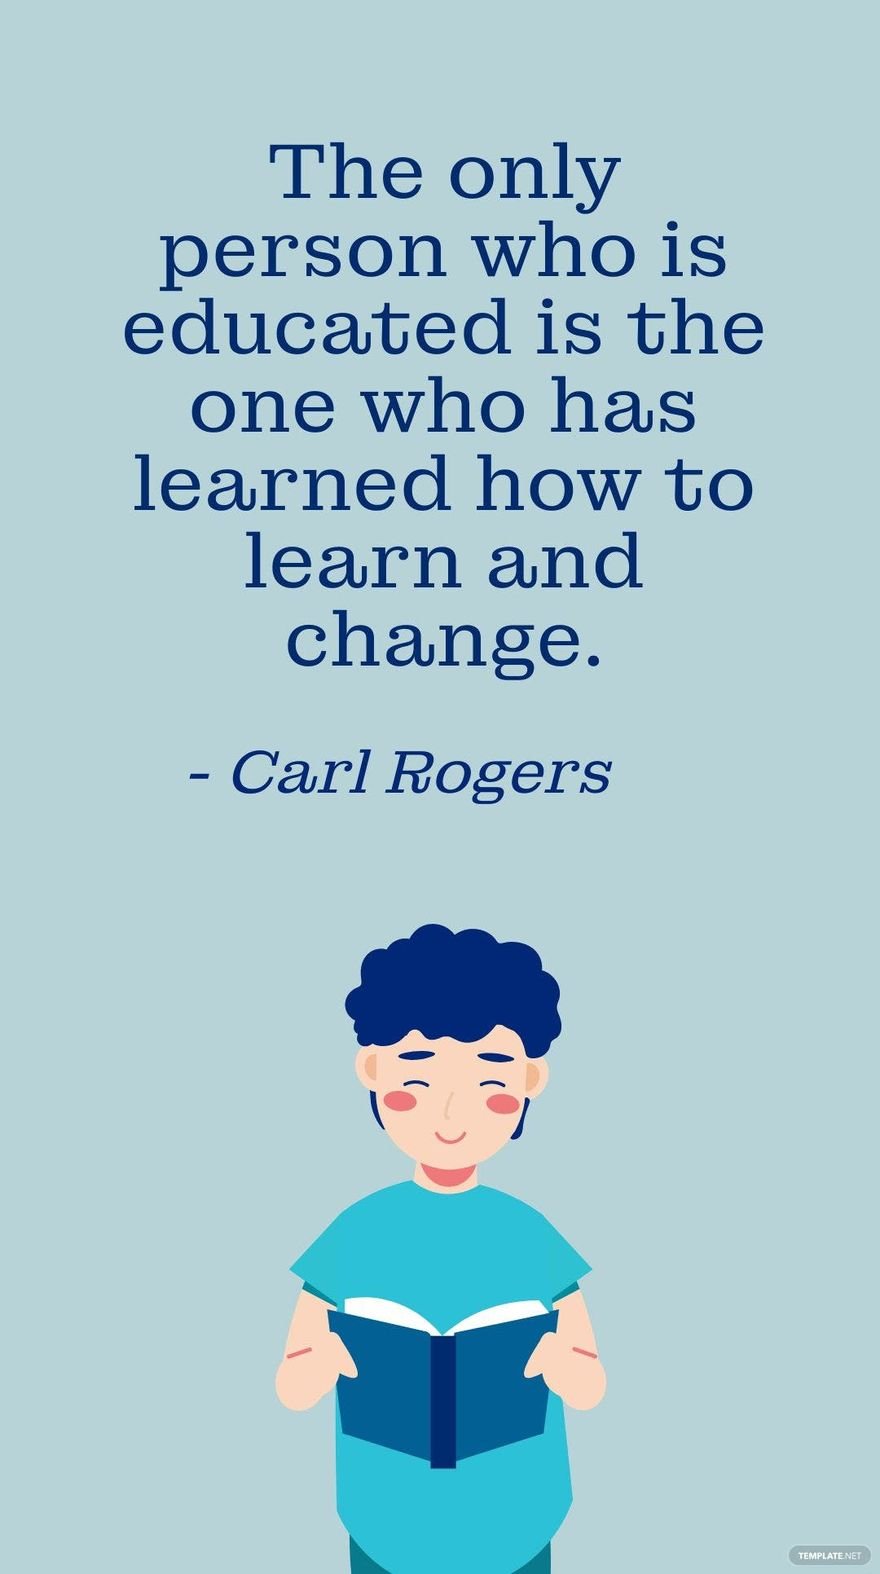 Carl Rogers - The only person who is educated is the one who has learned how to learn and change. in JPG